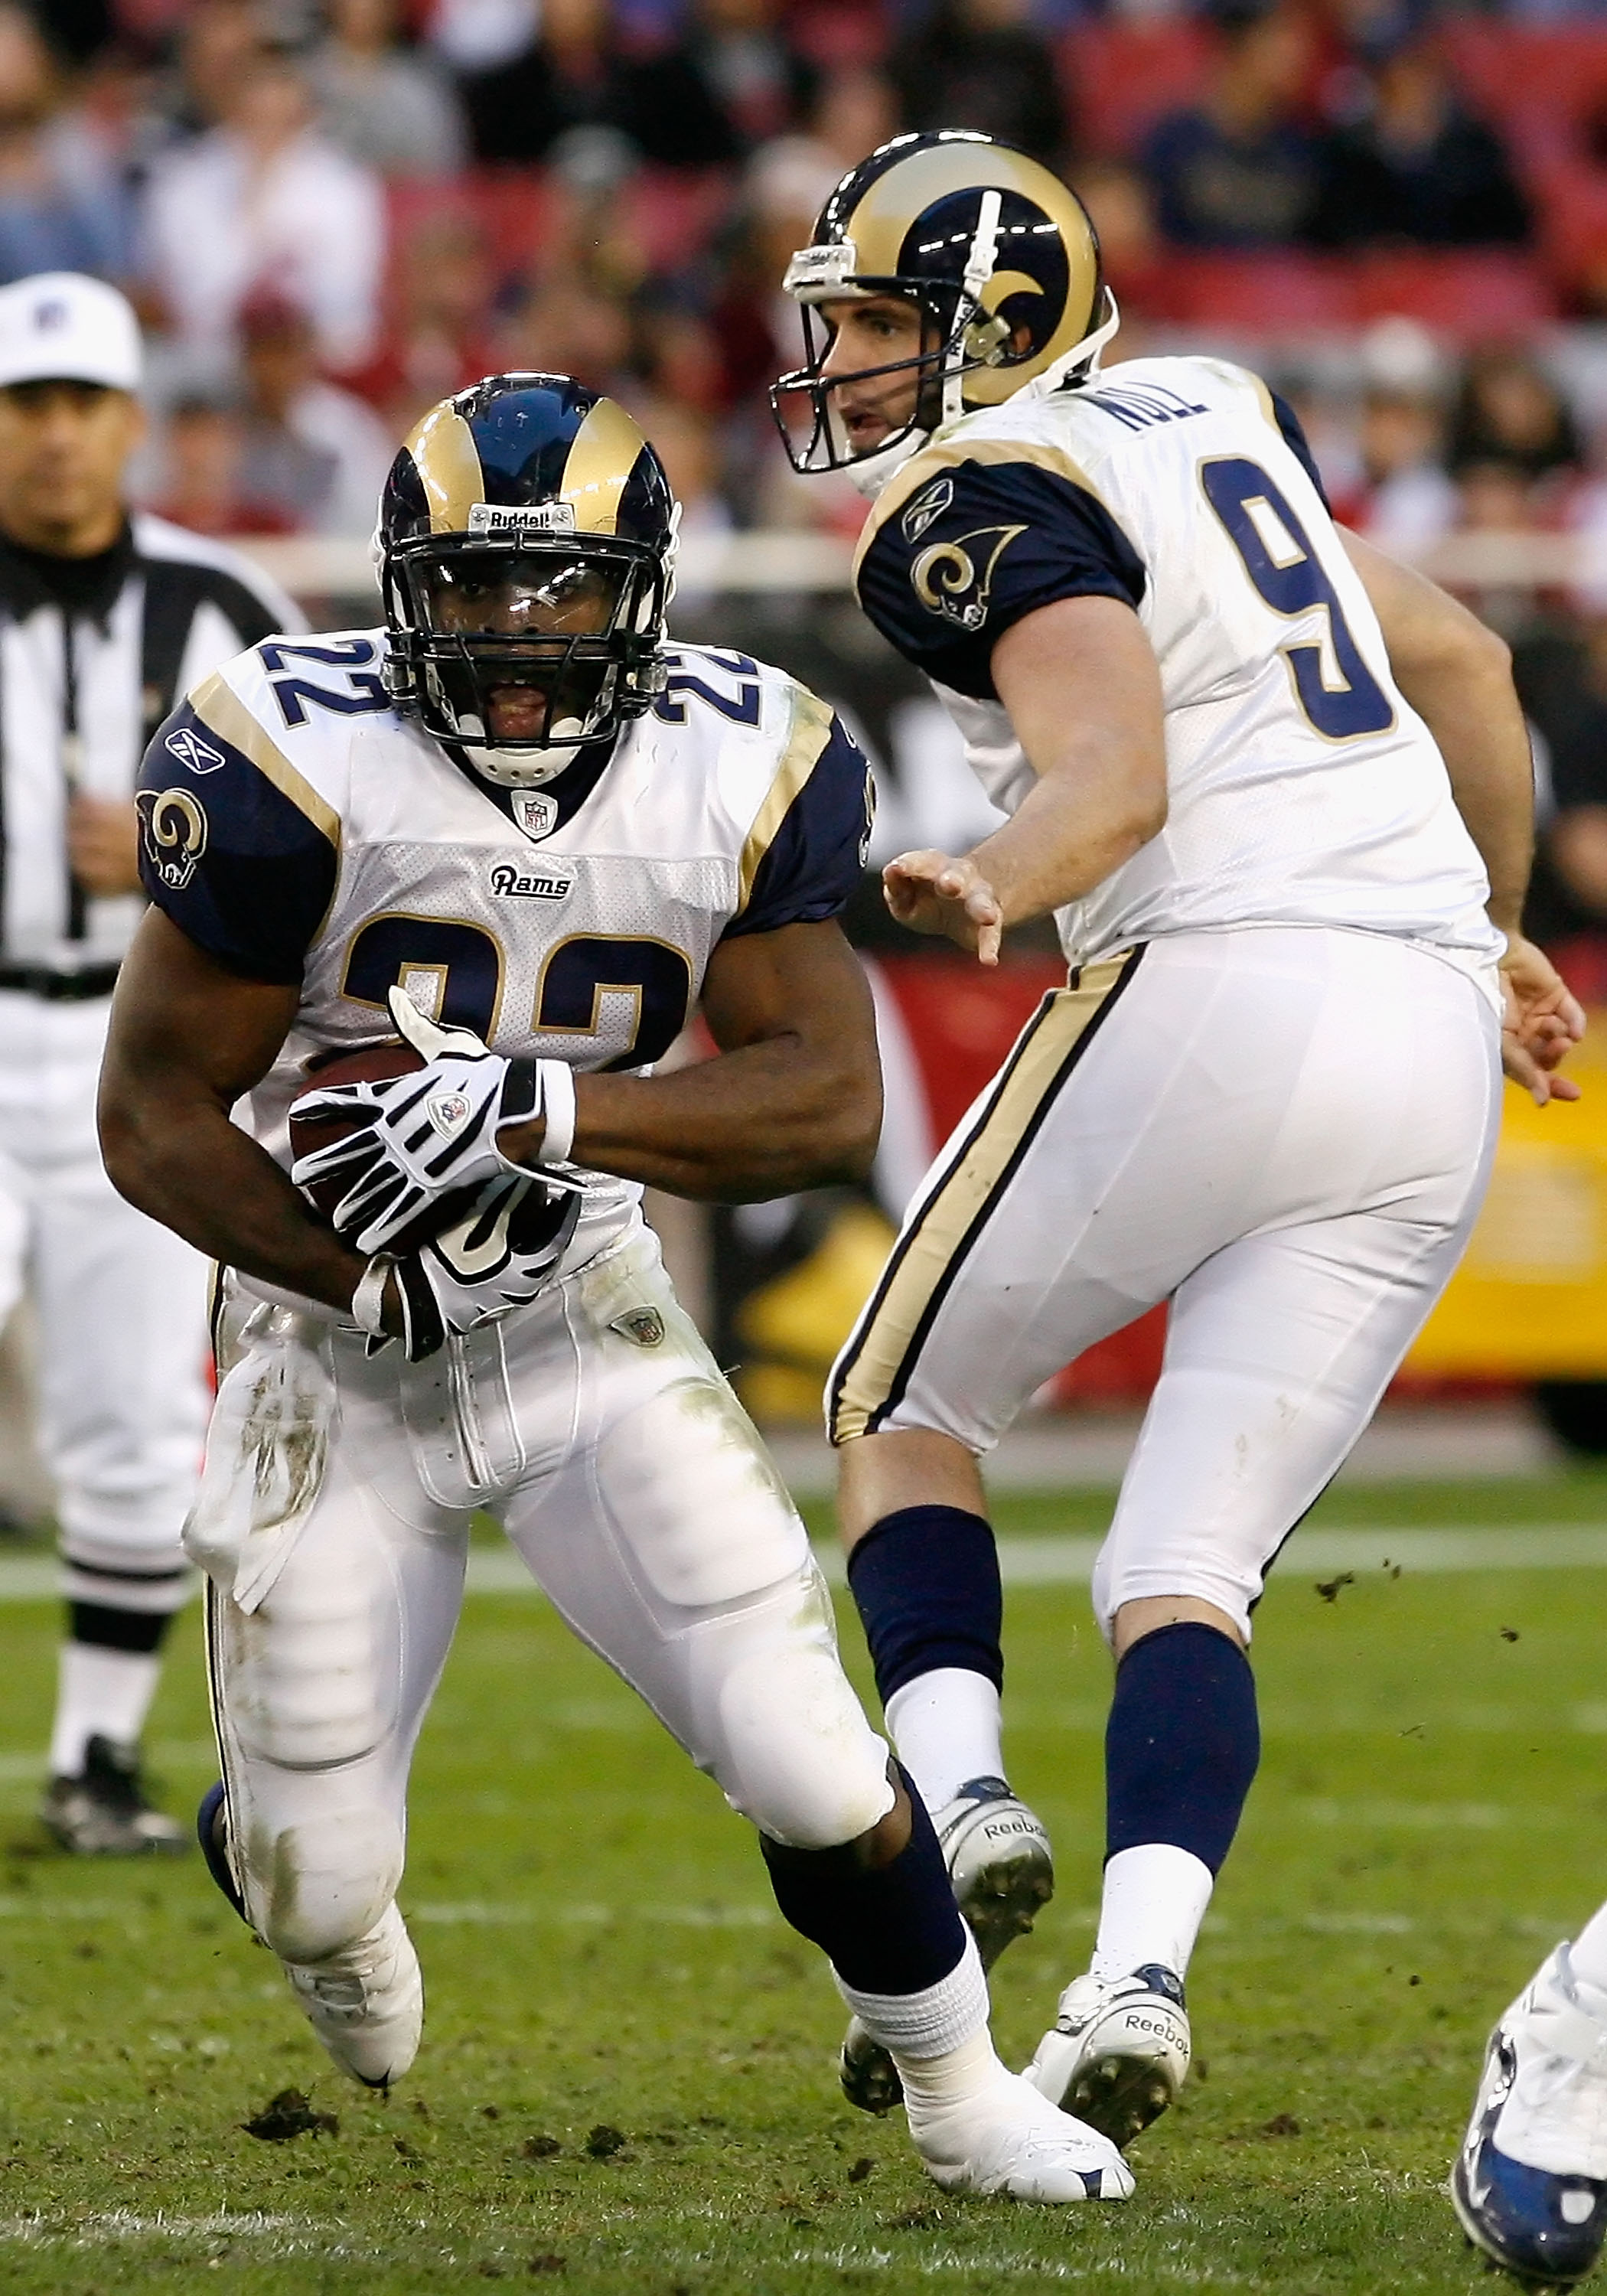 GLENDALE, AZ - DECEMBER 27:  Runningback Chris Ogbonnaya #22 of the St. Louis Rams rushes the ball against the Arizona Cardinals during the third quarter of the NFL game at the Universtity of Phoenix Stadium on December 27, 2009 in Glendale, Arizona. The 